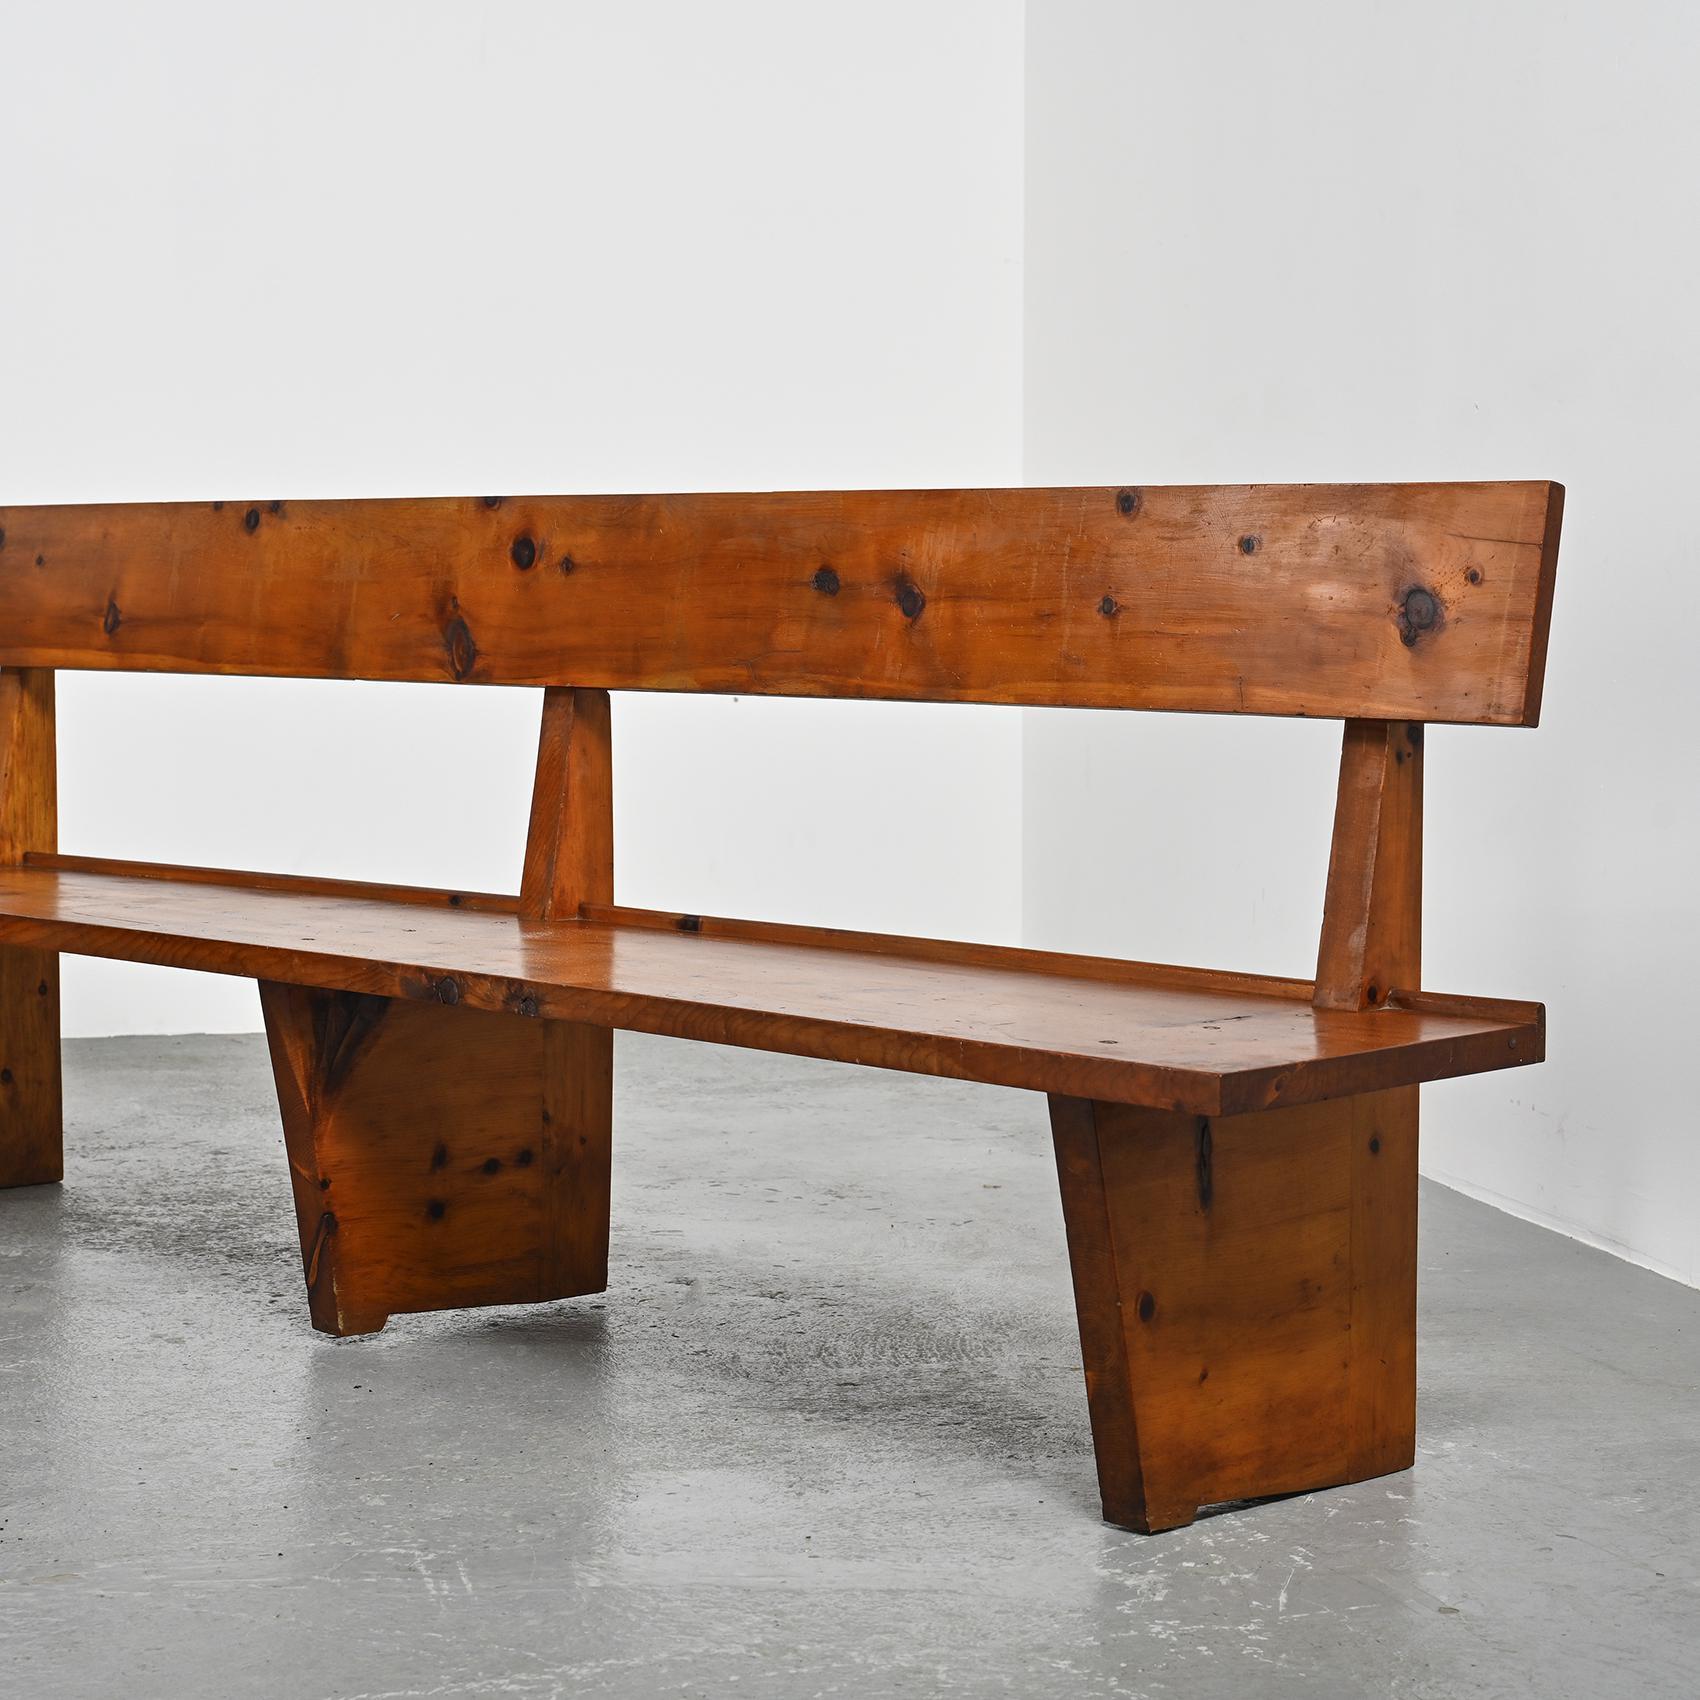 20th Century Large Vintage Bench in Solid Wood, France circa 1970